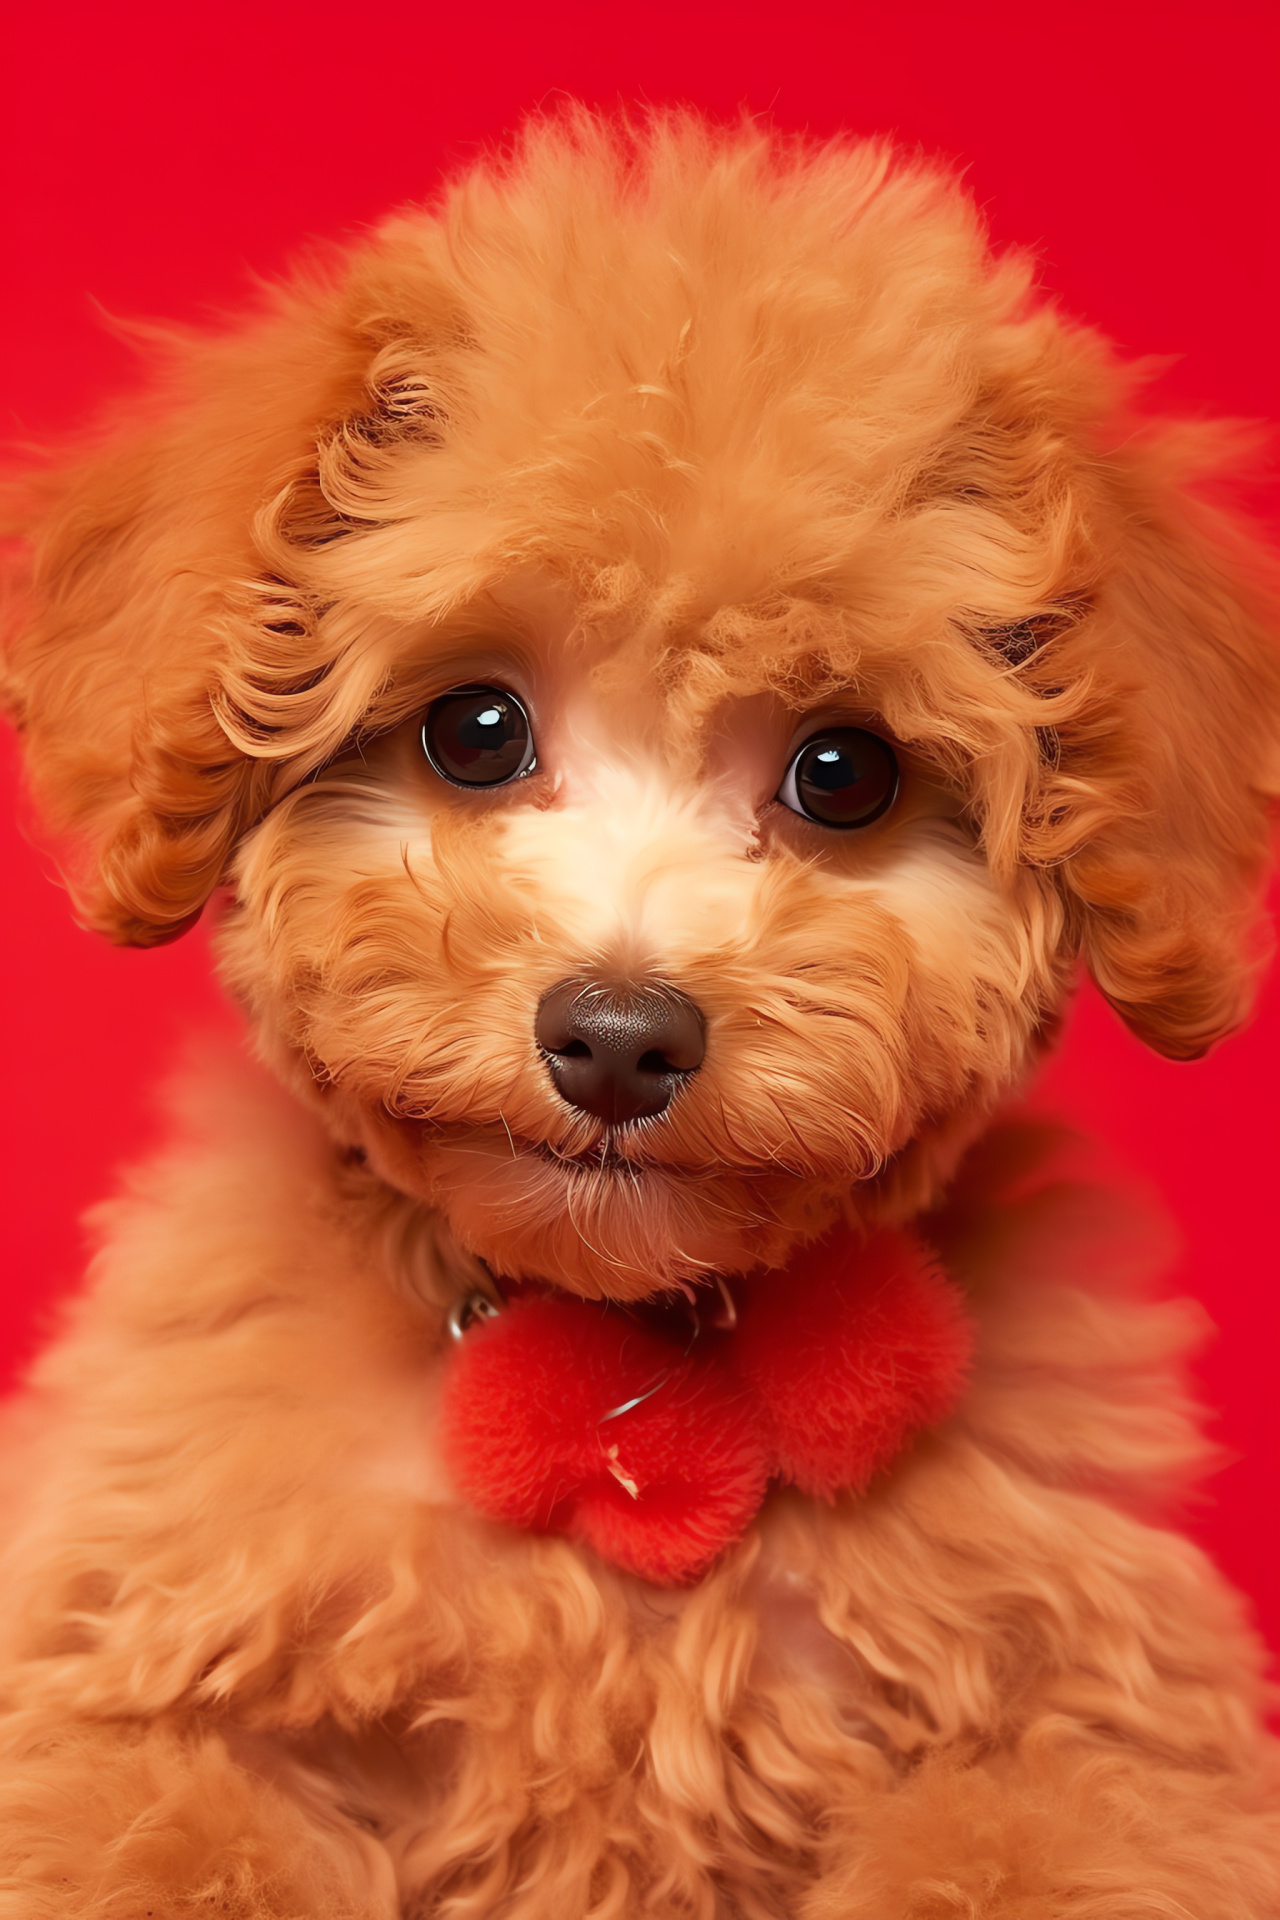 Poodle appearance, apricot color, stylish grooming, close-up animal, red isolated backdrop, HD Phone Image